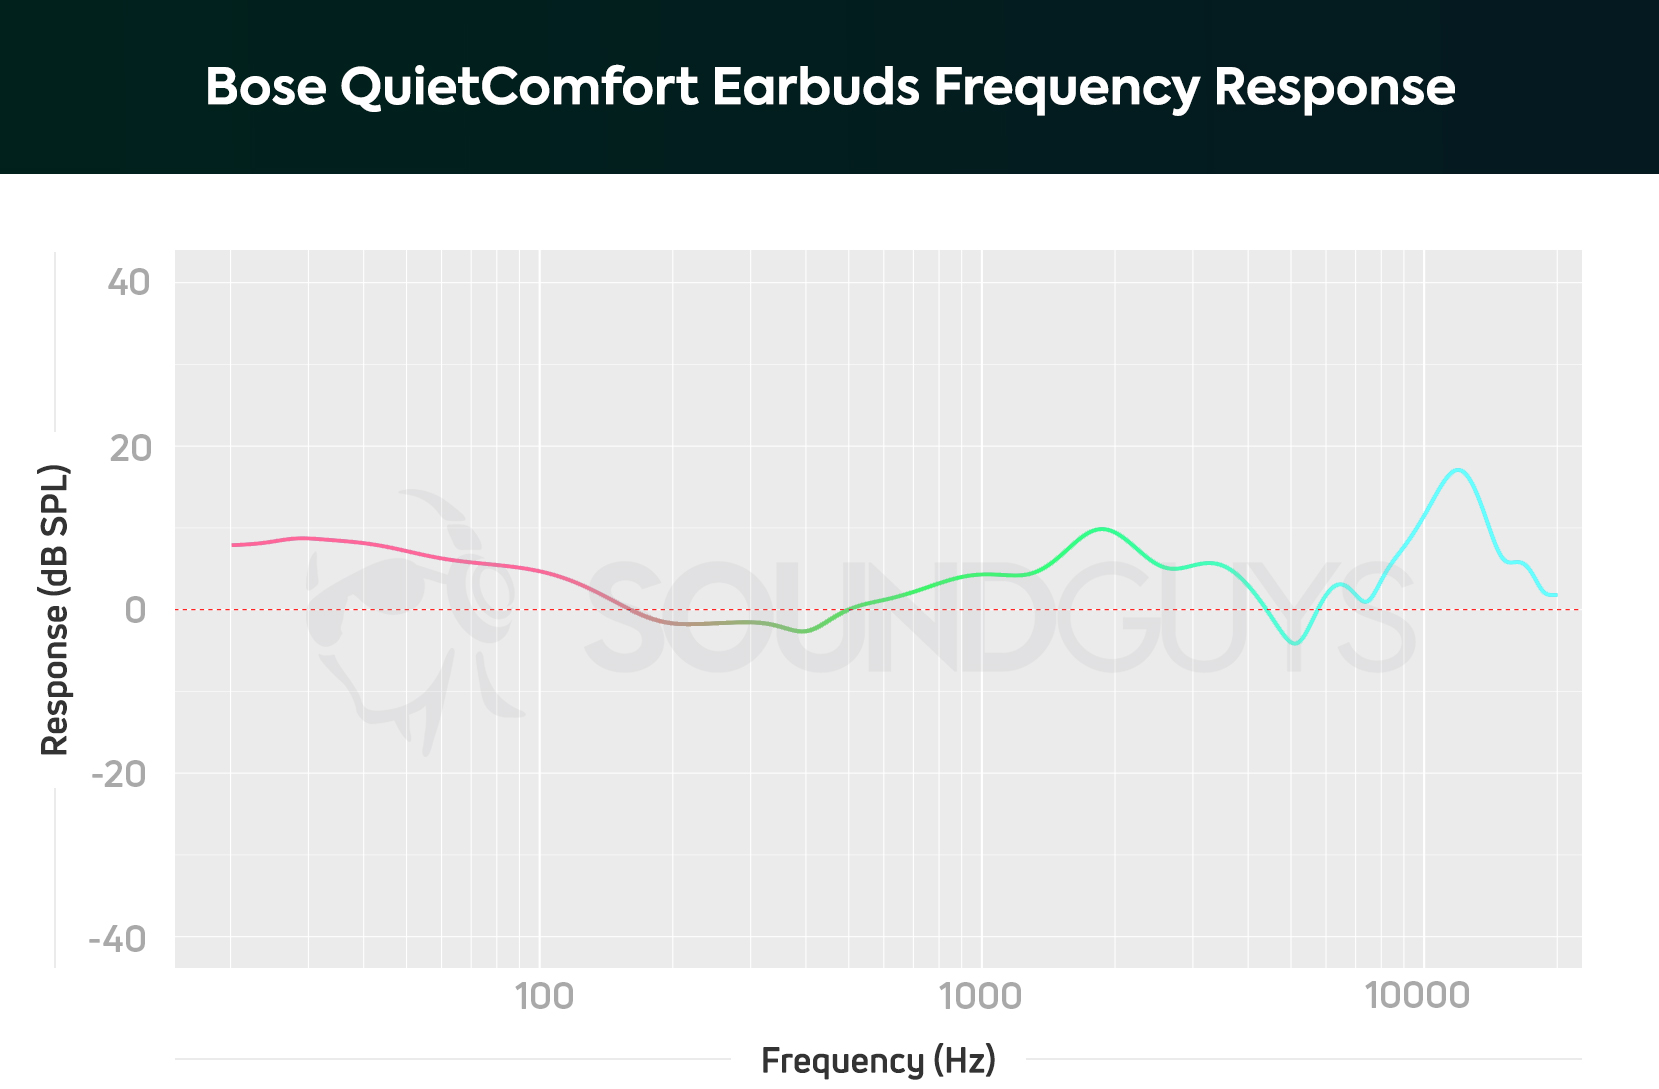 The Bose QuietComfort Earbuds frequency response chart depicts an amplified bass and upper-midrange response.